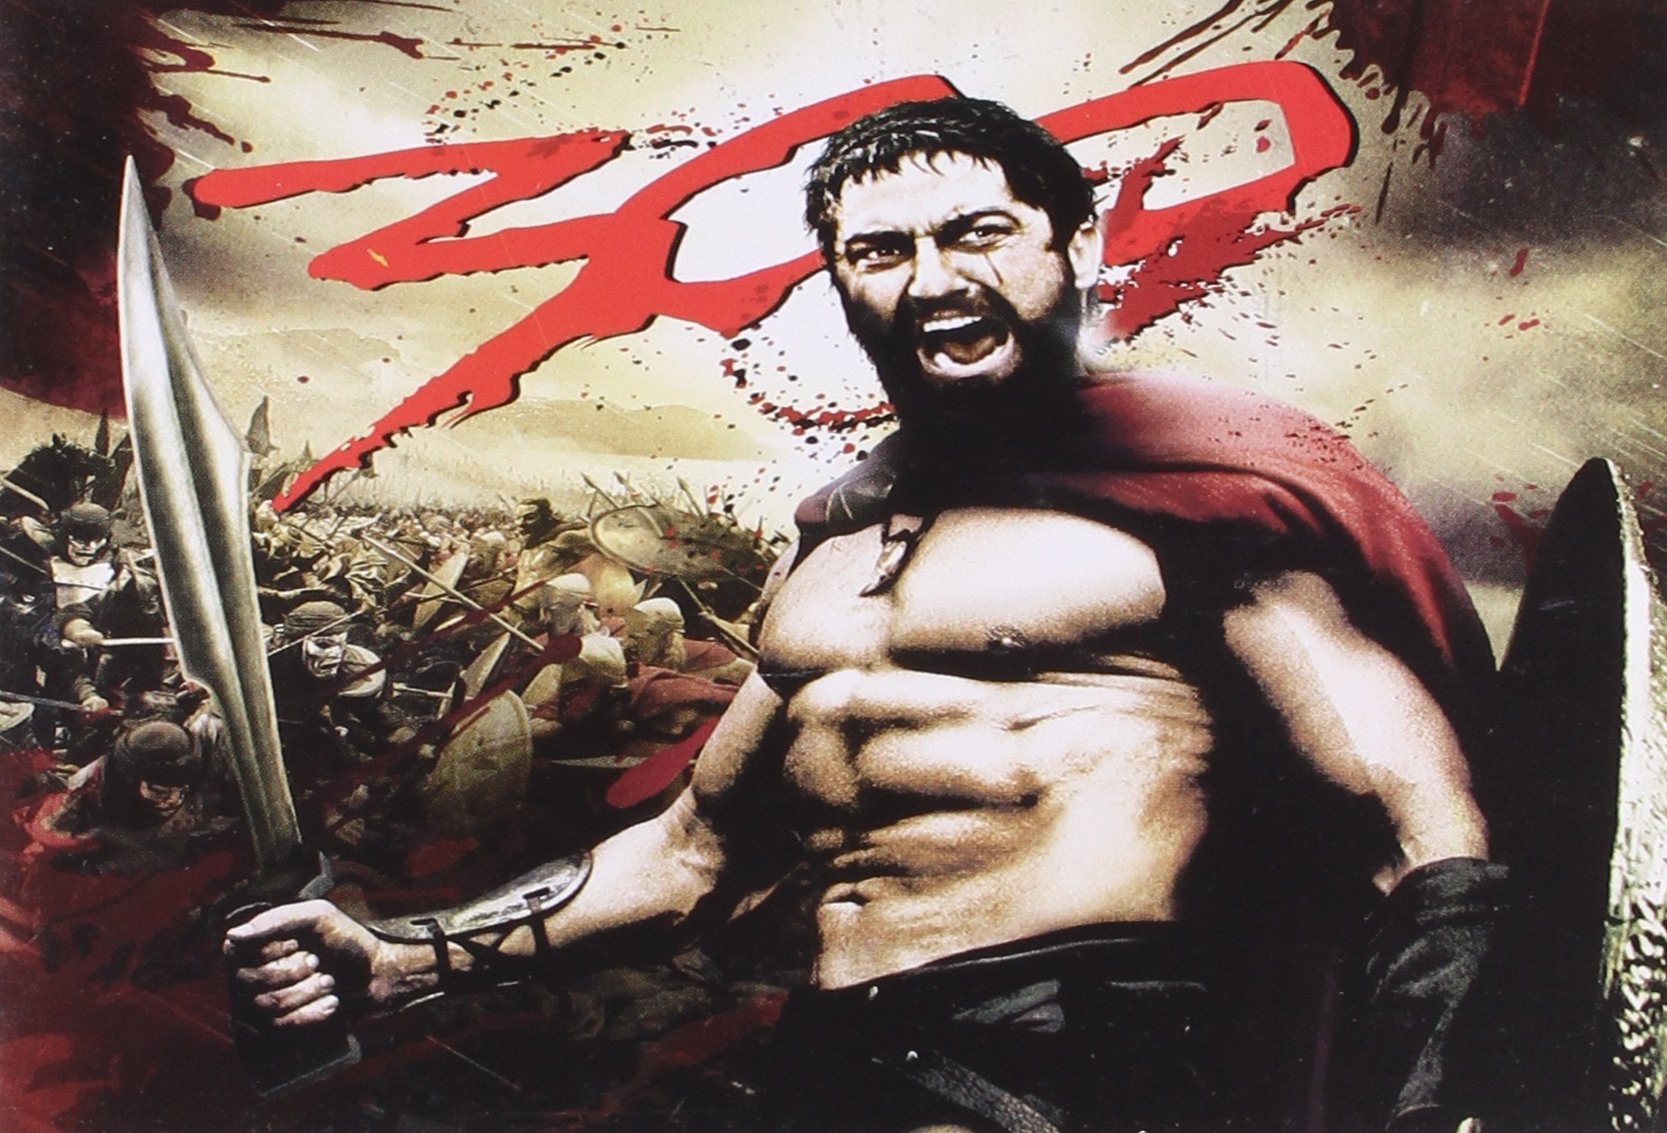 300-movie-purchase-or-watch-online